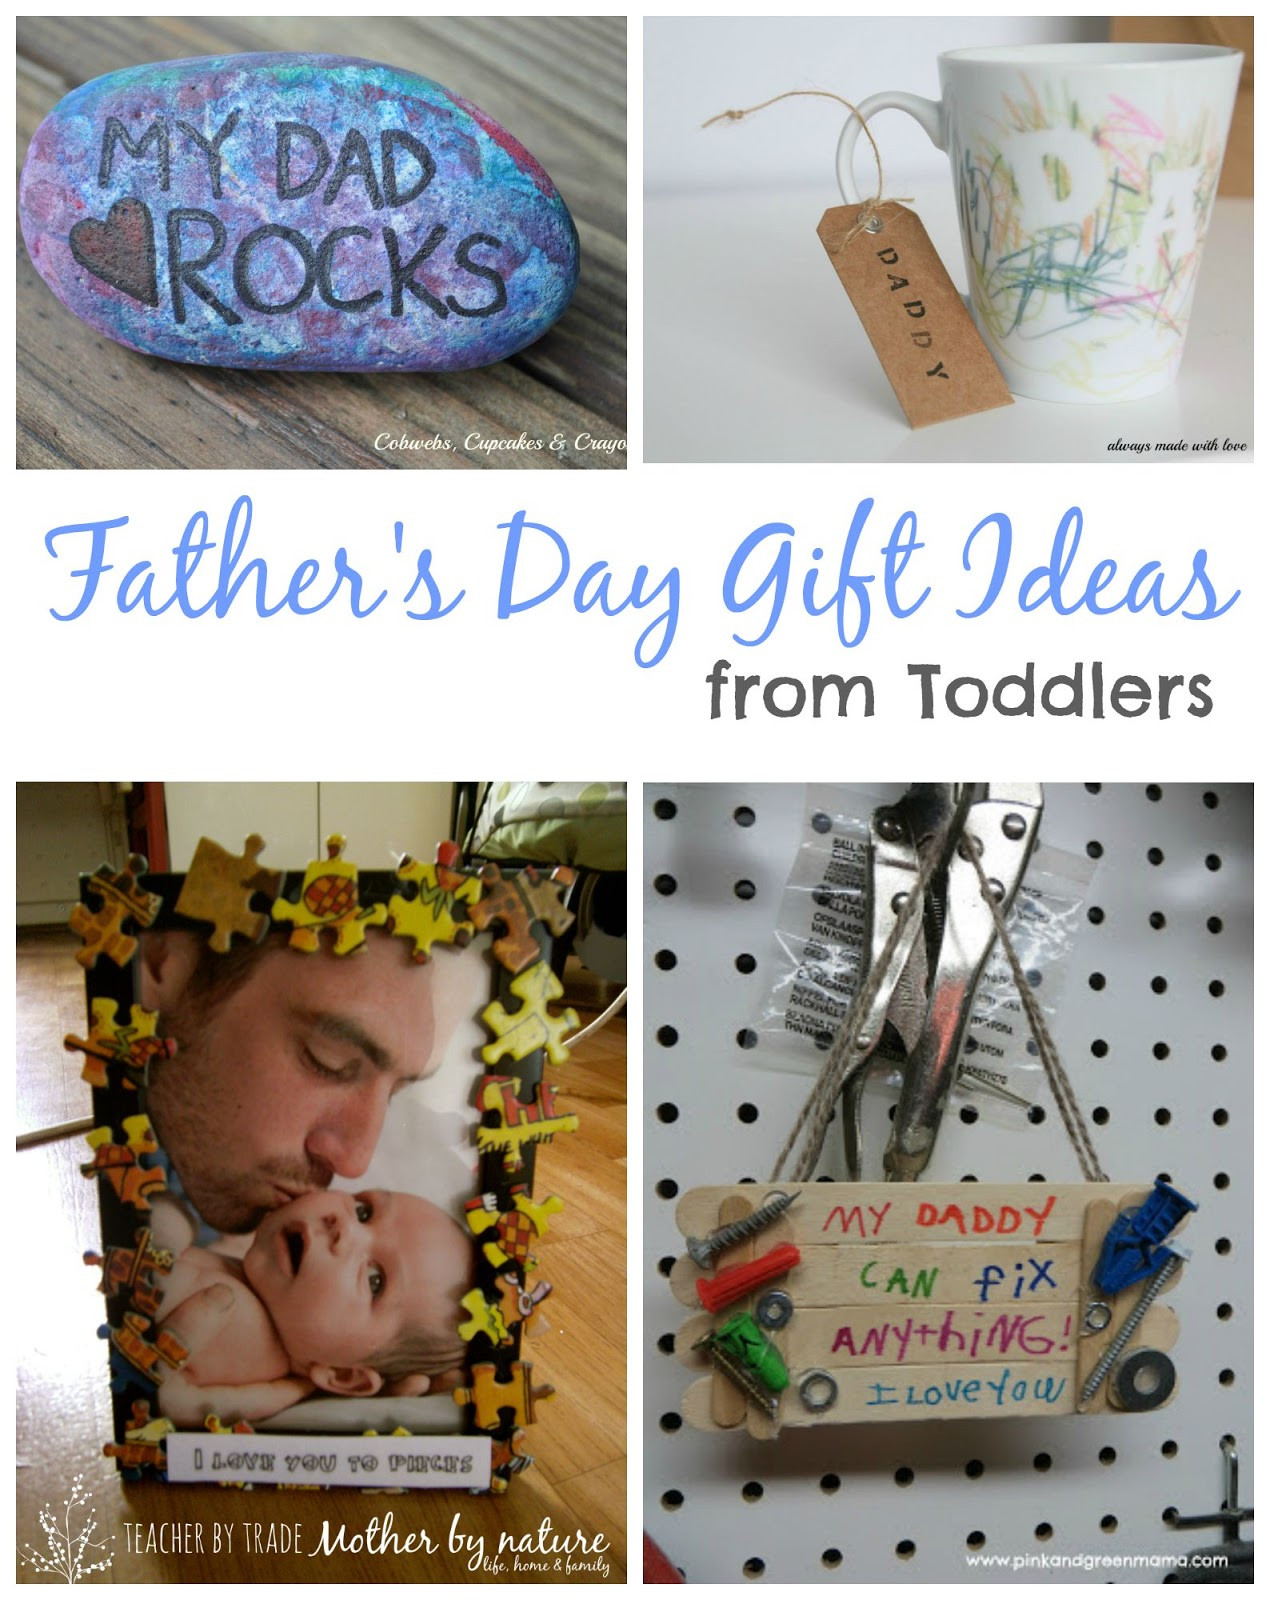 Fathers Day Gifts From Toddler
 Father s Day Gift Ideas from Toddlers Teacher by trade